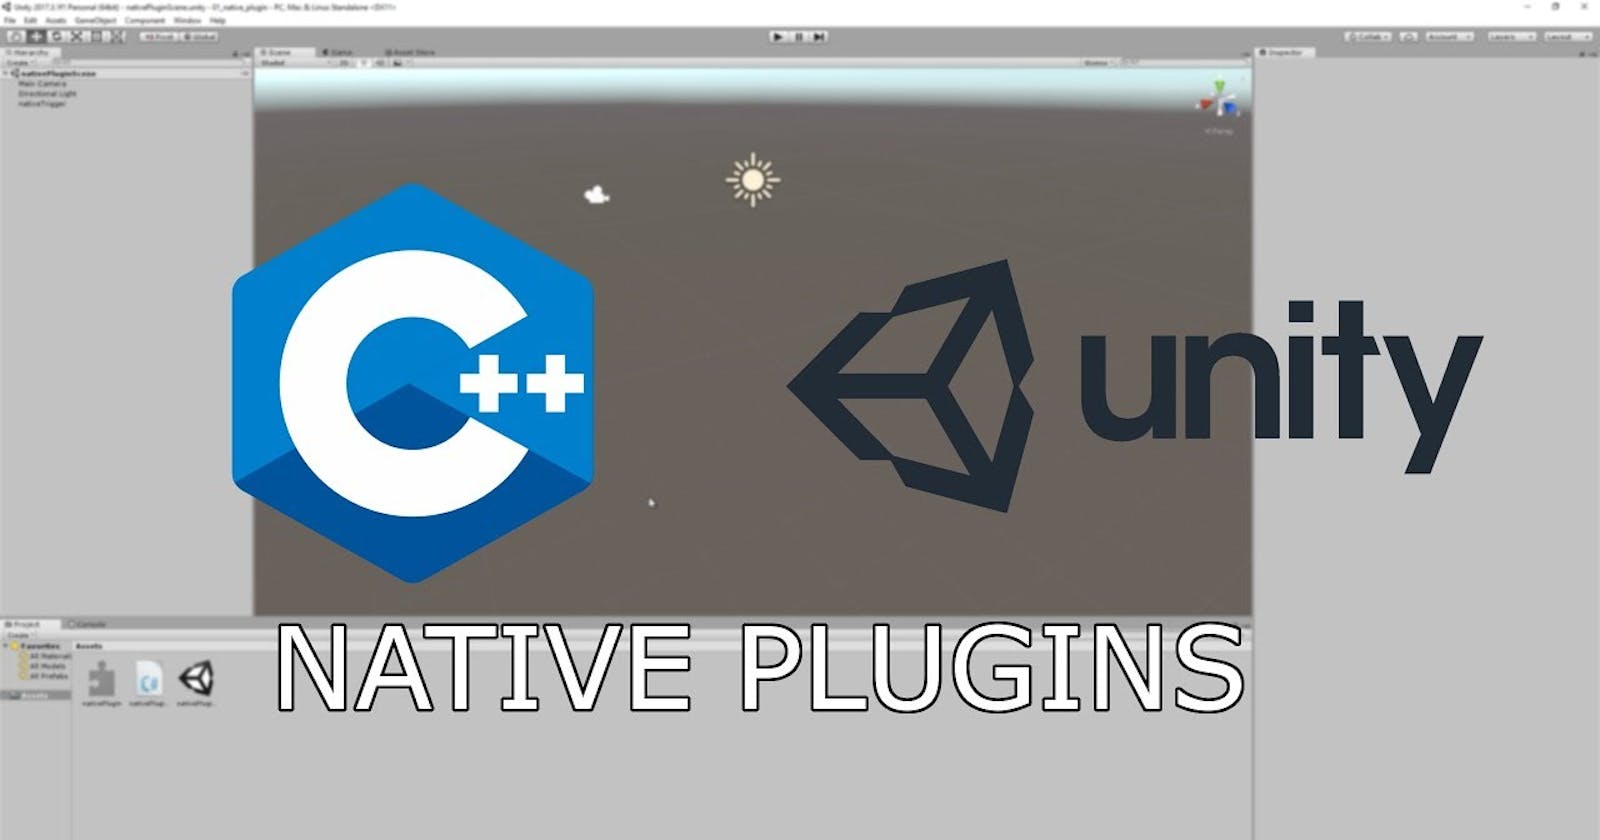 C++ today's reading and Unity game engine